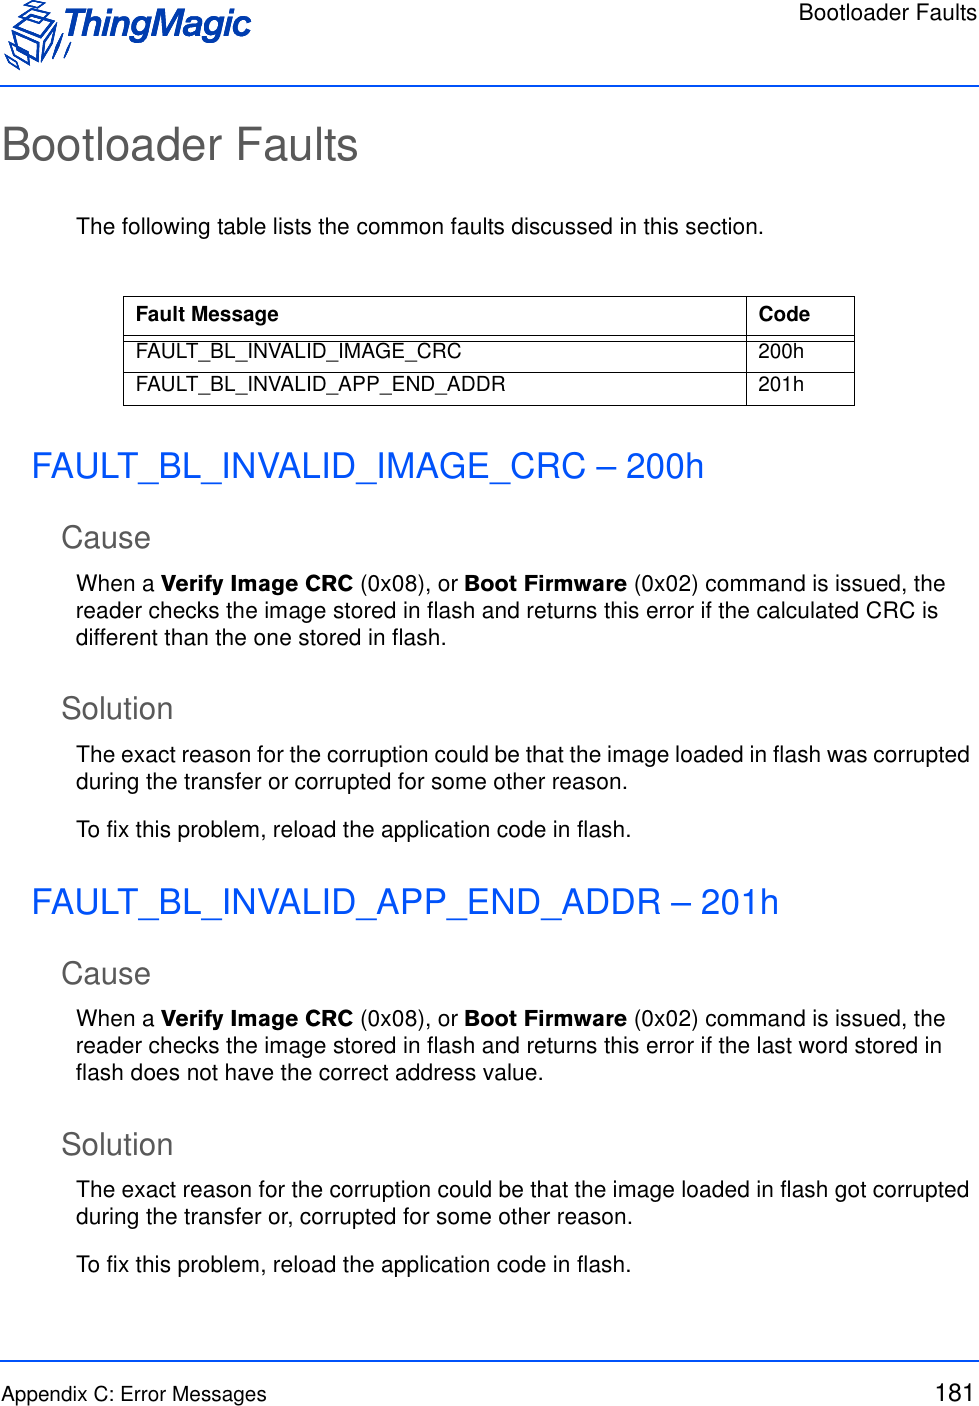 Bootloader FaultsAppendix C: Error Messages 181Bootloader FaultsThe following table lists the common faults discussed in this section.FAULT_BL_INVALID_IMAGE_CRC – 200hCauseWhen a Verify Image CRC (0x08), or Boot Firmware (0x02) command is issued, the reader checks the image stored in flash and returns this error if the calculated CRC is different than the one stored in flash.SolutionThe exact reason for the corruption could be that the image loaded in flash was corrupted during the transfer or corrupted for some other reason. To fix this problem, reload the application code in flash.FAULT_BL_INVALID_APP_END_ADDR – 201hCauseWhen a Verify Image CRC (0x08), or Boot Firmware (0x02) command is issued, the reader checks the image stored in flash and returns this error if the last word stored in flash does not have the correct address value.SolutionThe exact reason for the corruption could be that the image loaded in flash got corrupted during the transfer or, corrupted for some other reason. To fix this problem, reload the application code in flash.Fault Message CodeFAULT_BL_INVALID_IMAGE_CRC 200hFAULT_BL_INVALID_APP_END_ADDR 201h